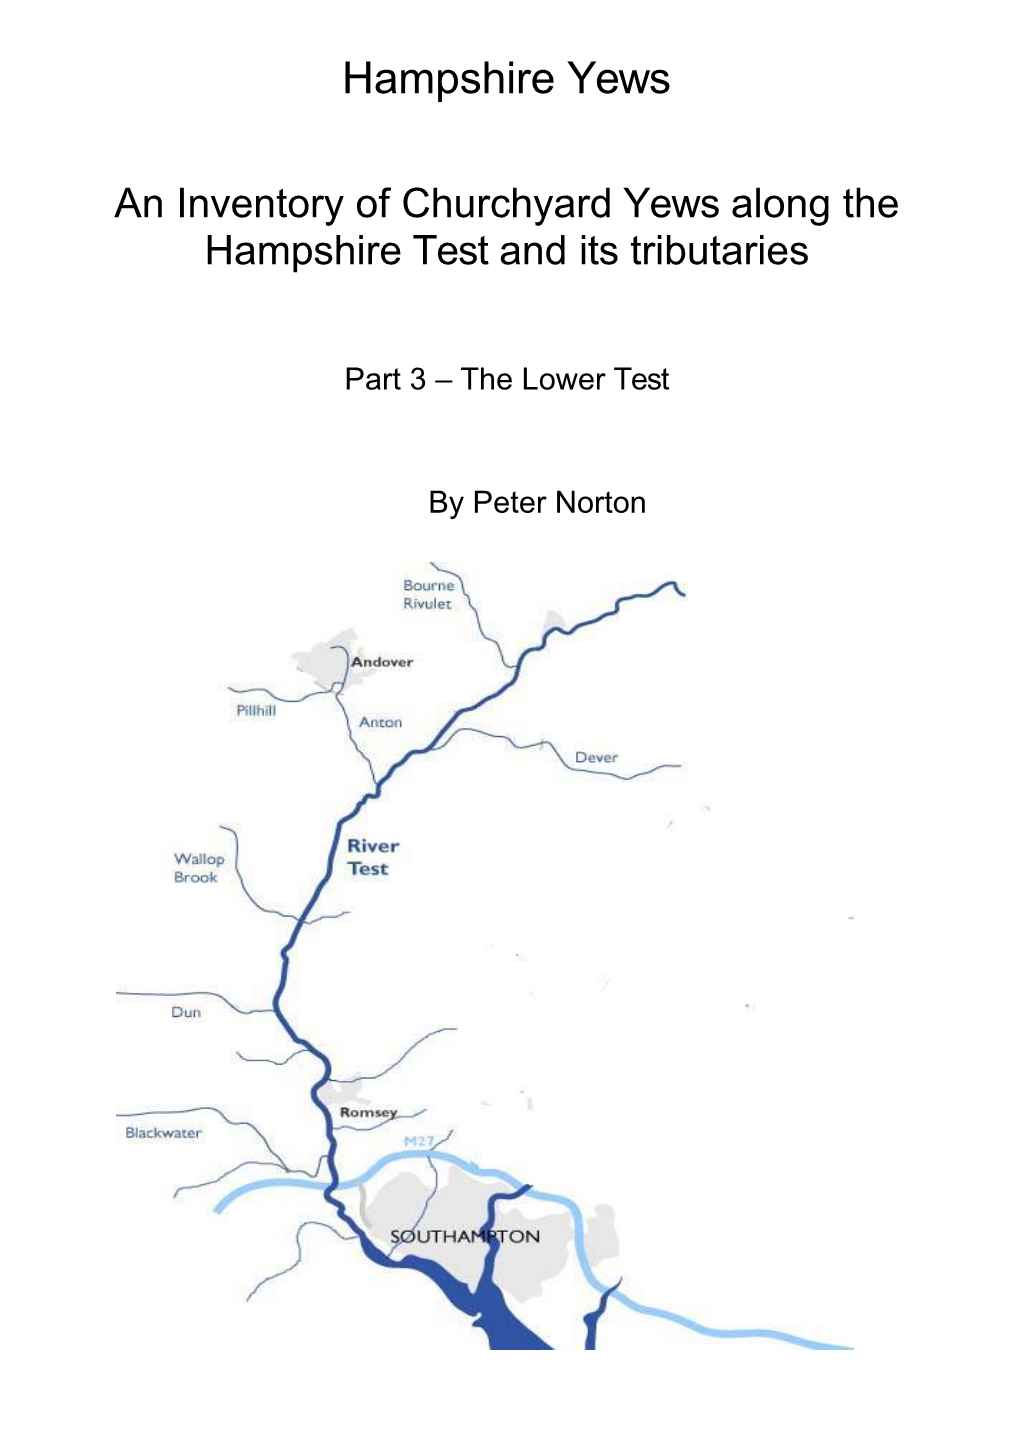 An Inventory of Churchyard Yews Along the Hampshire Test and Its Tributaries